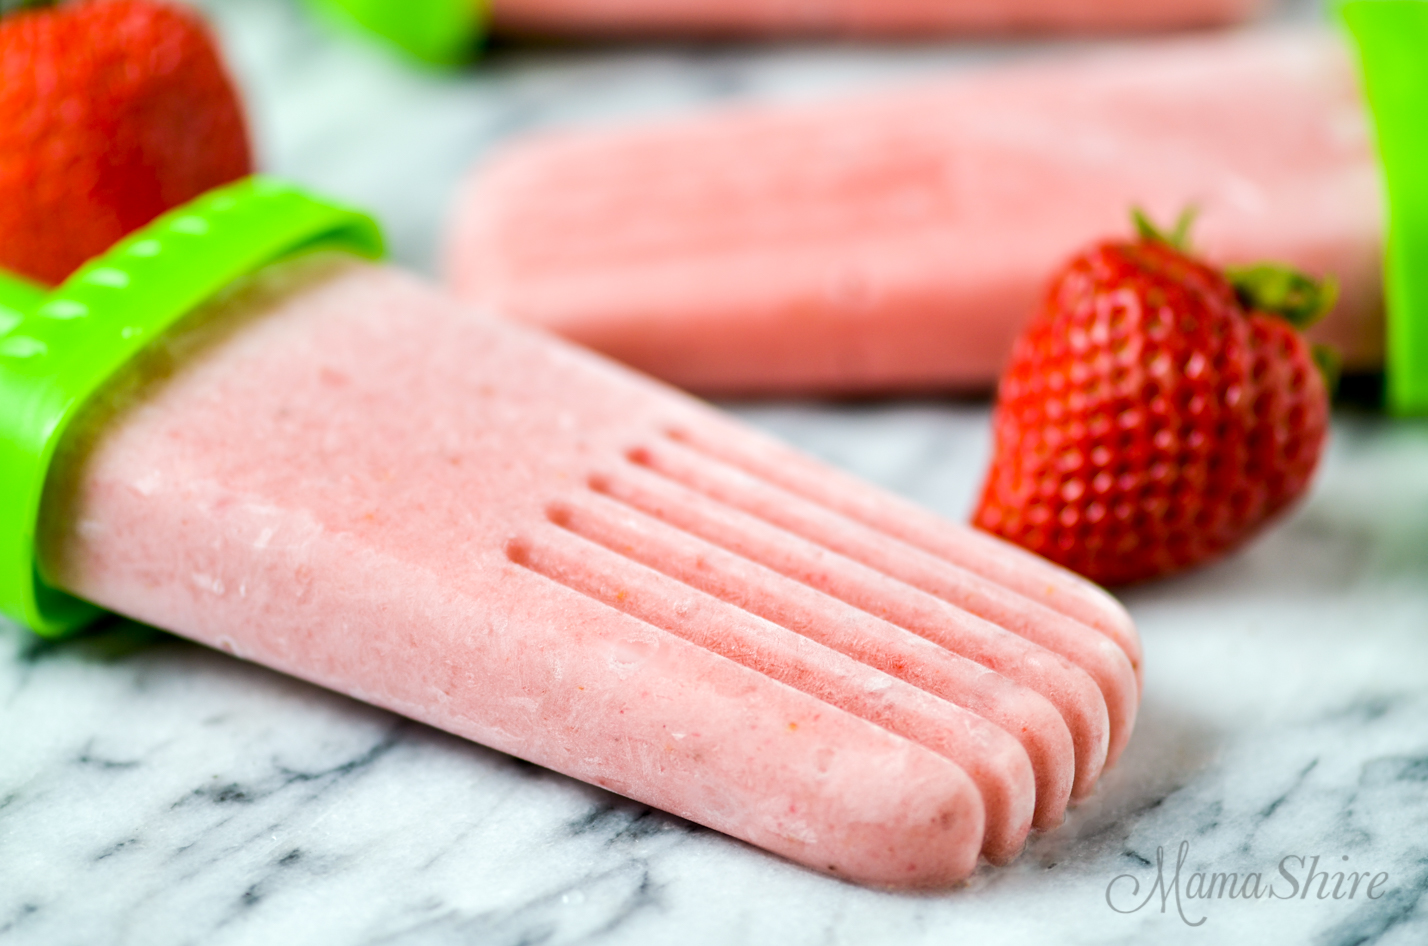 Pink popsicles made with a strawberry banana yogurt recipe that is dairy-free.